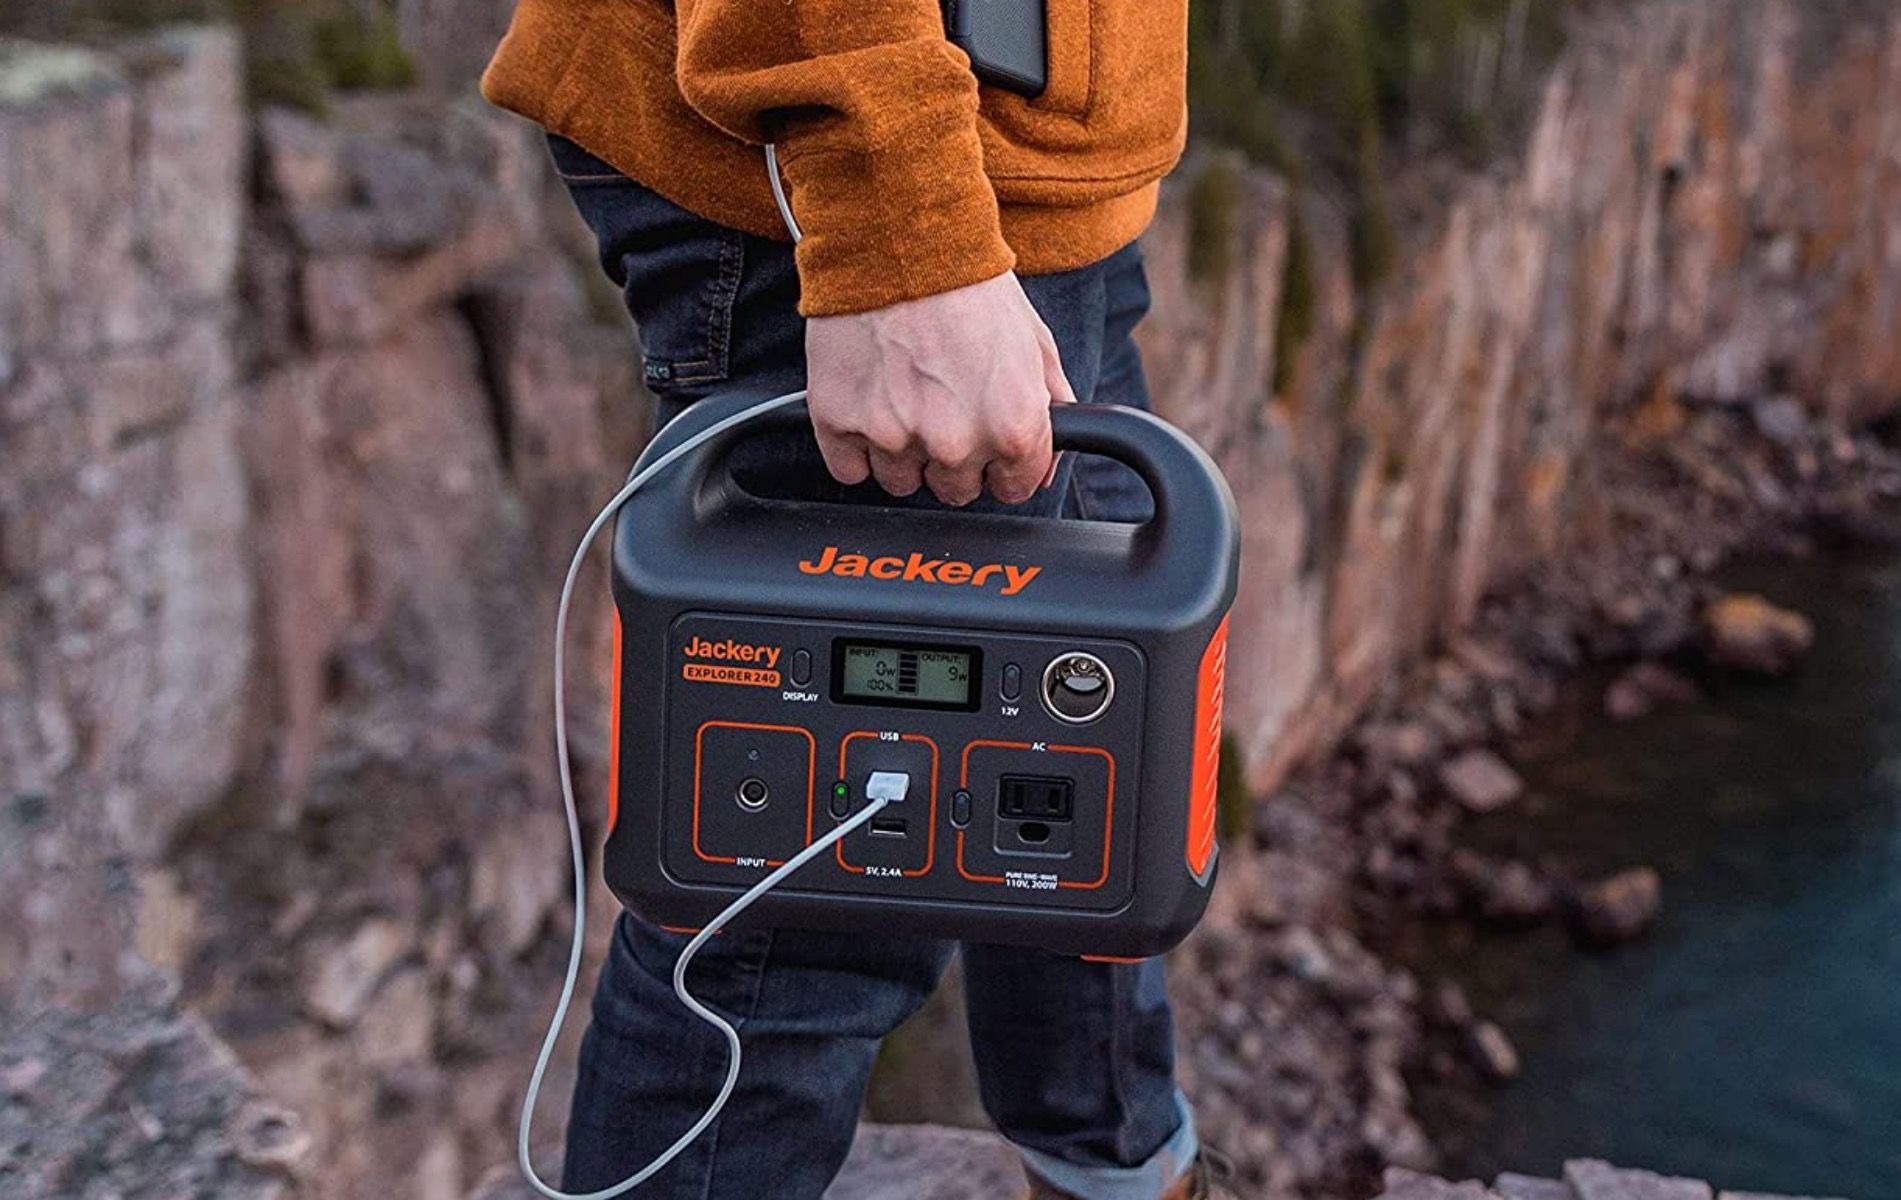 A Jackery Explorer 240 being carried